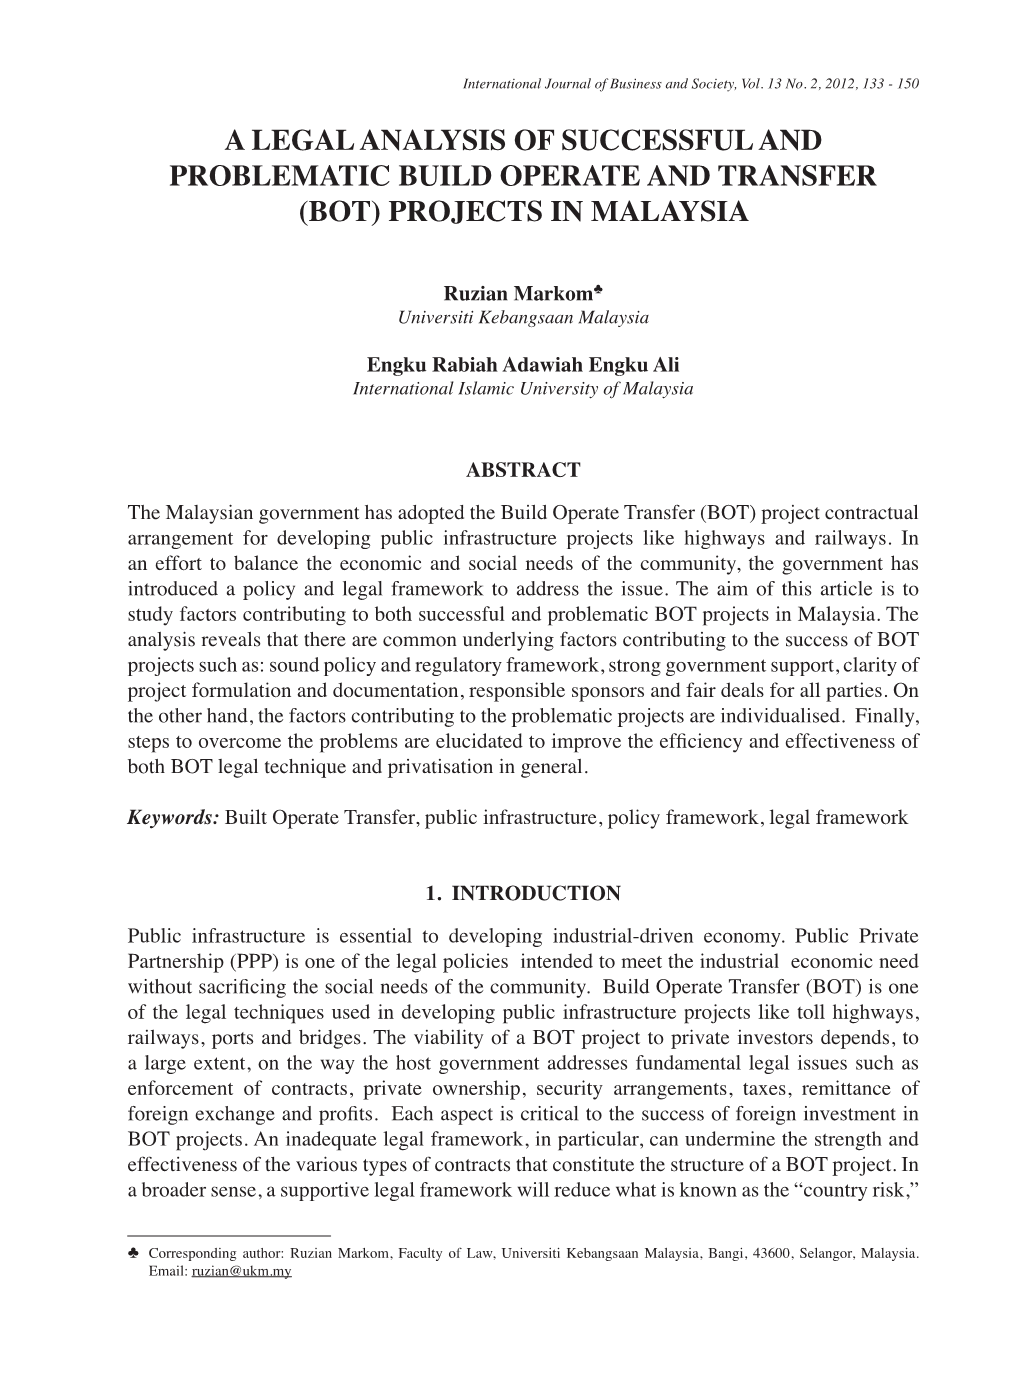 A Legal Analysis of Successful and Problematic Build Operate and Transfer (Bot) Projects in Malaysia